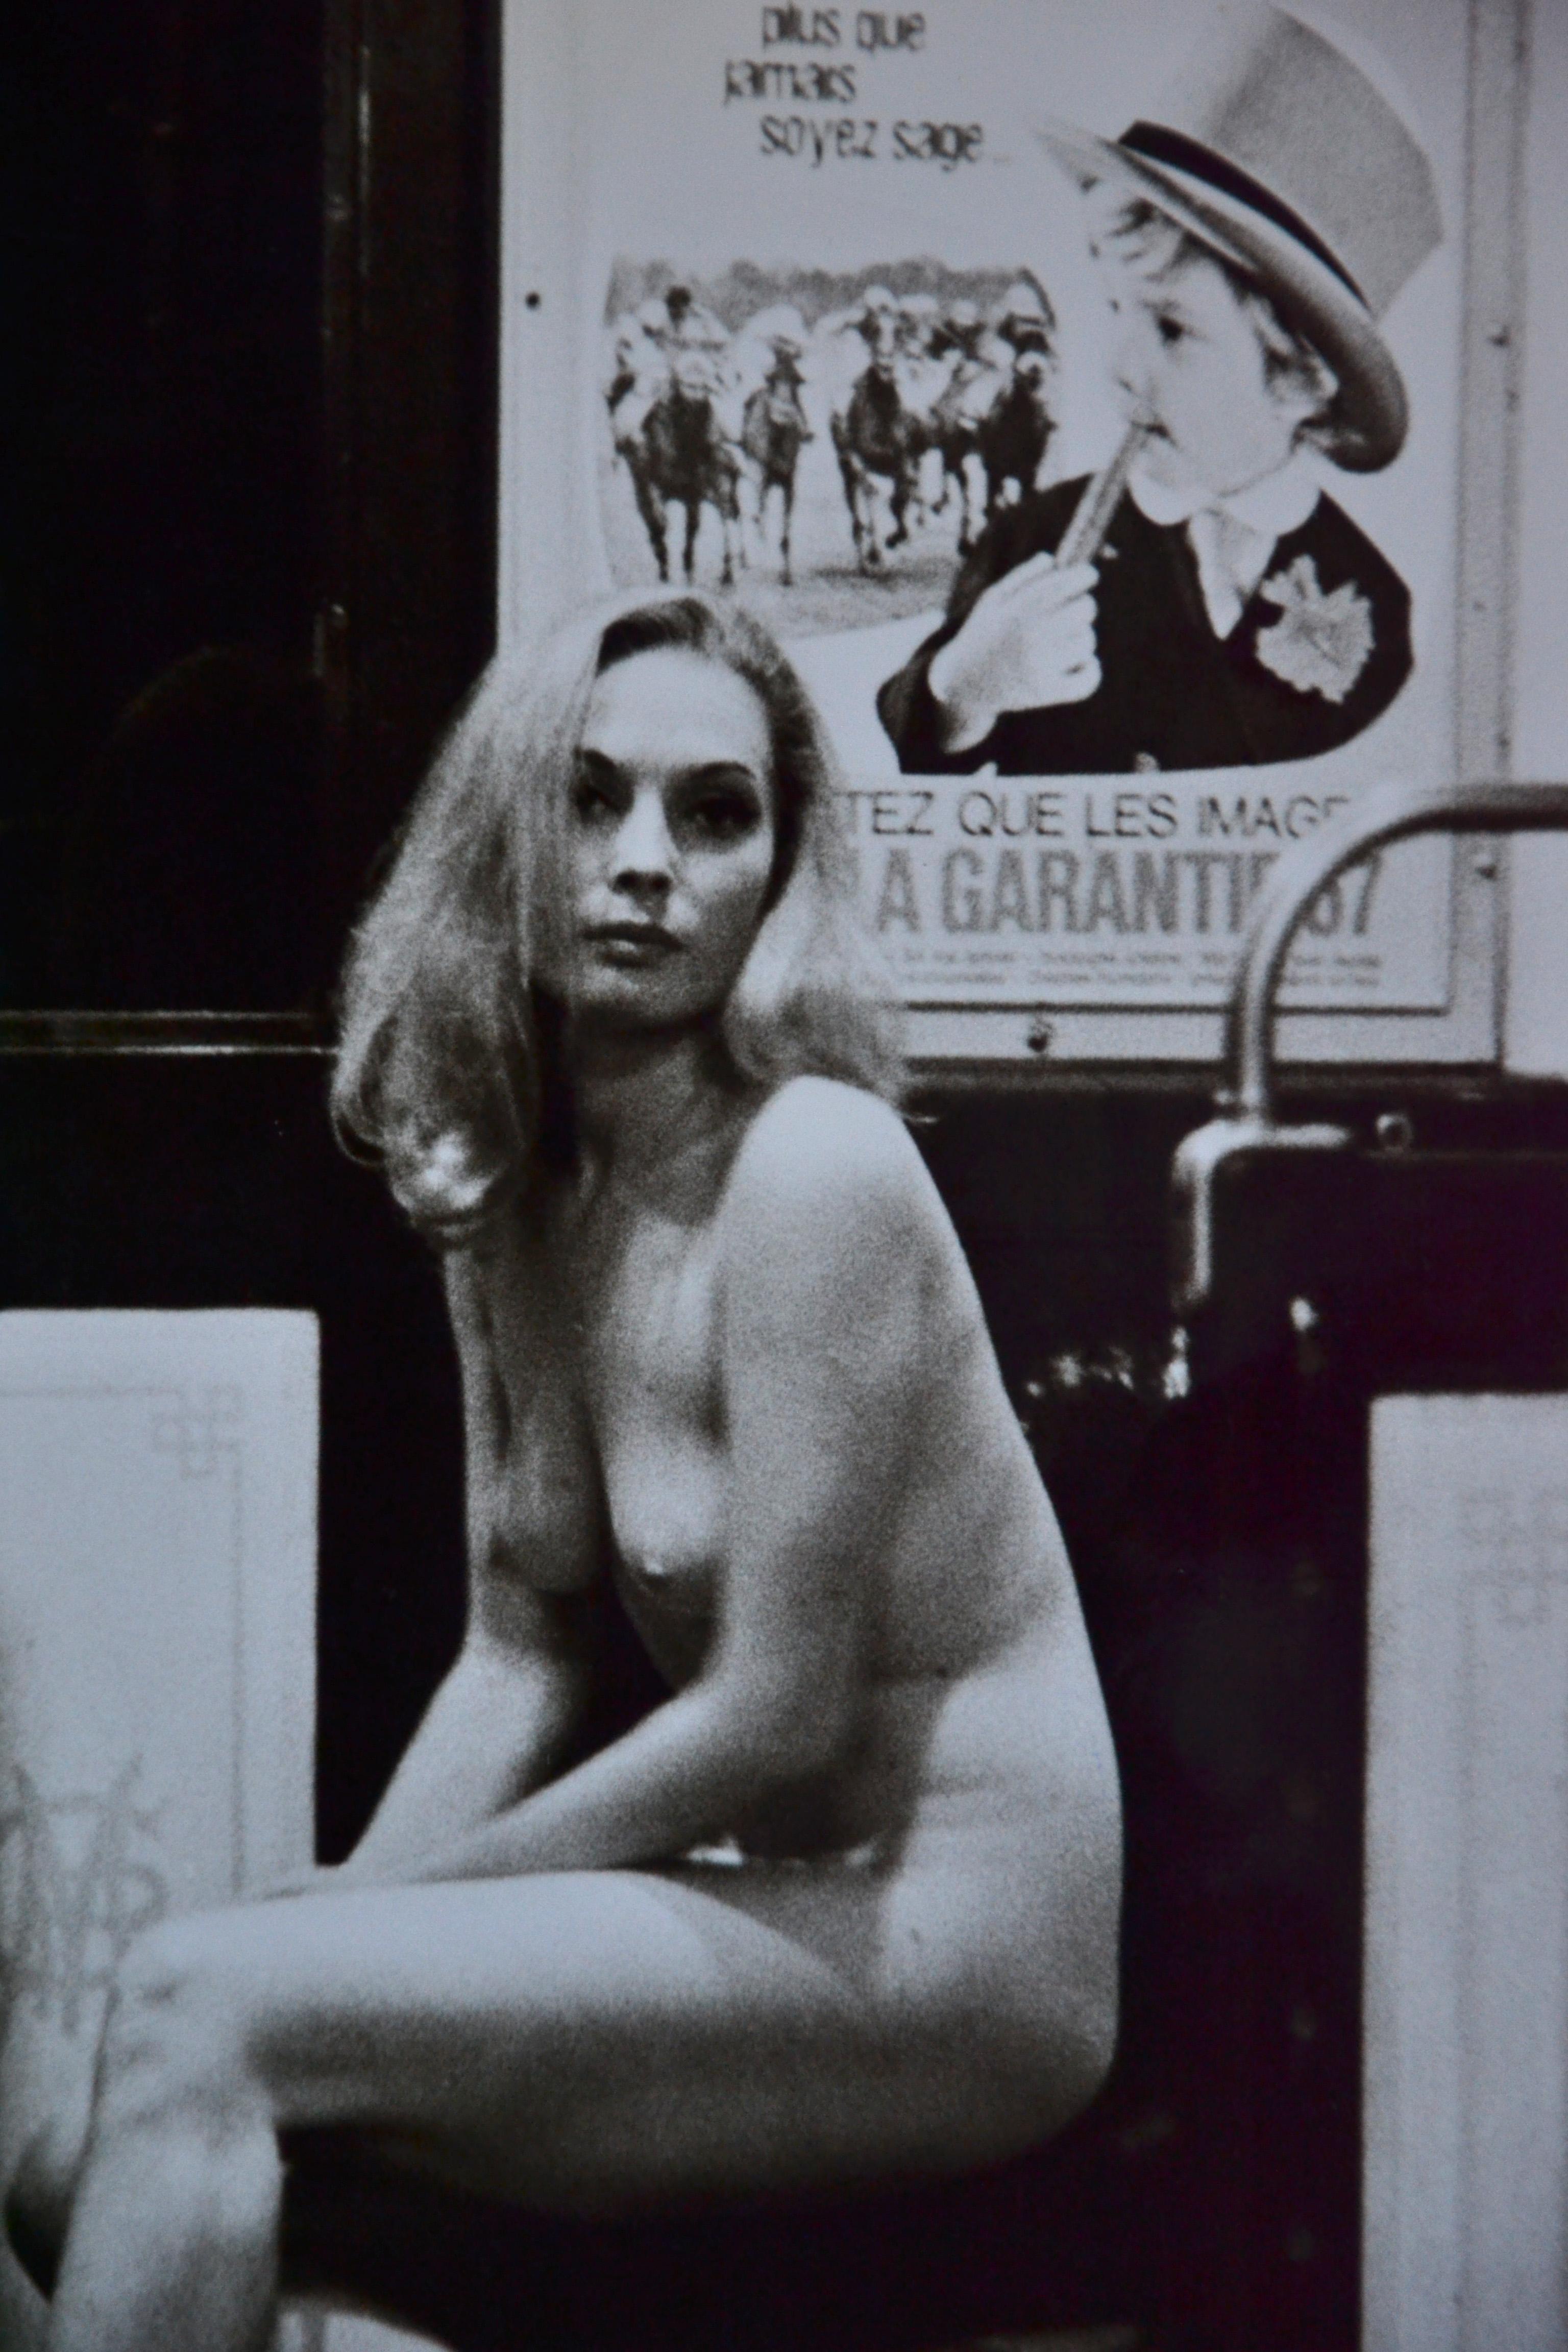 Paris  - Nude in Metro - Photograph by Ghnassia